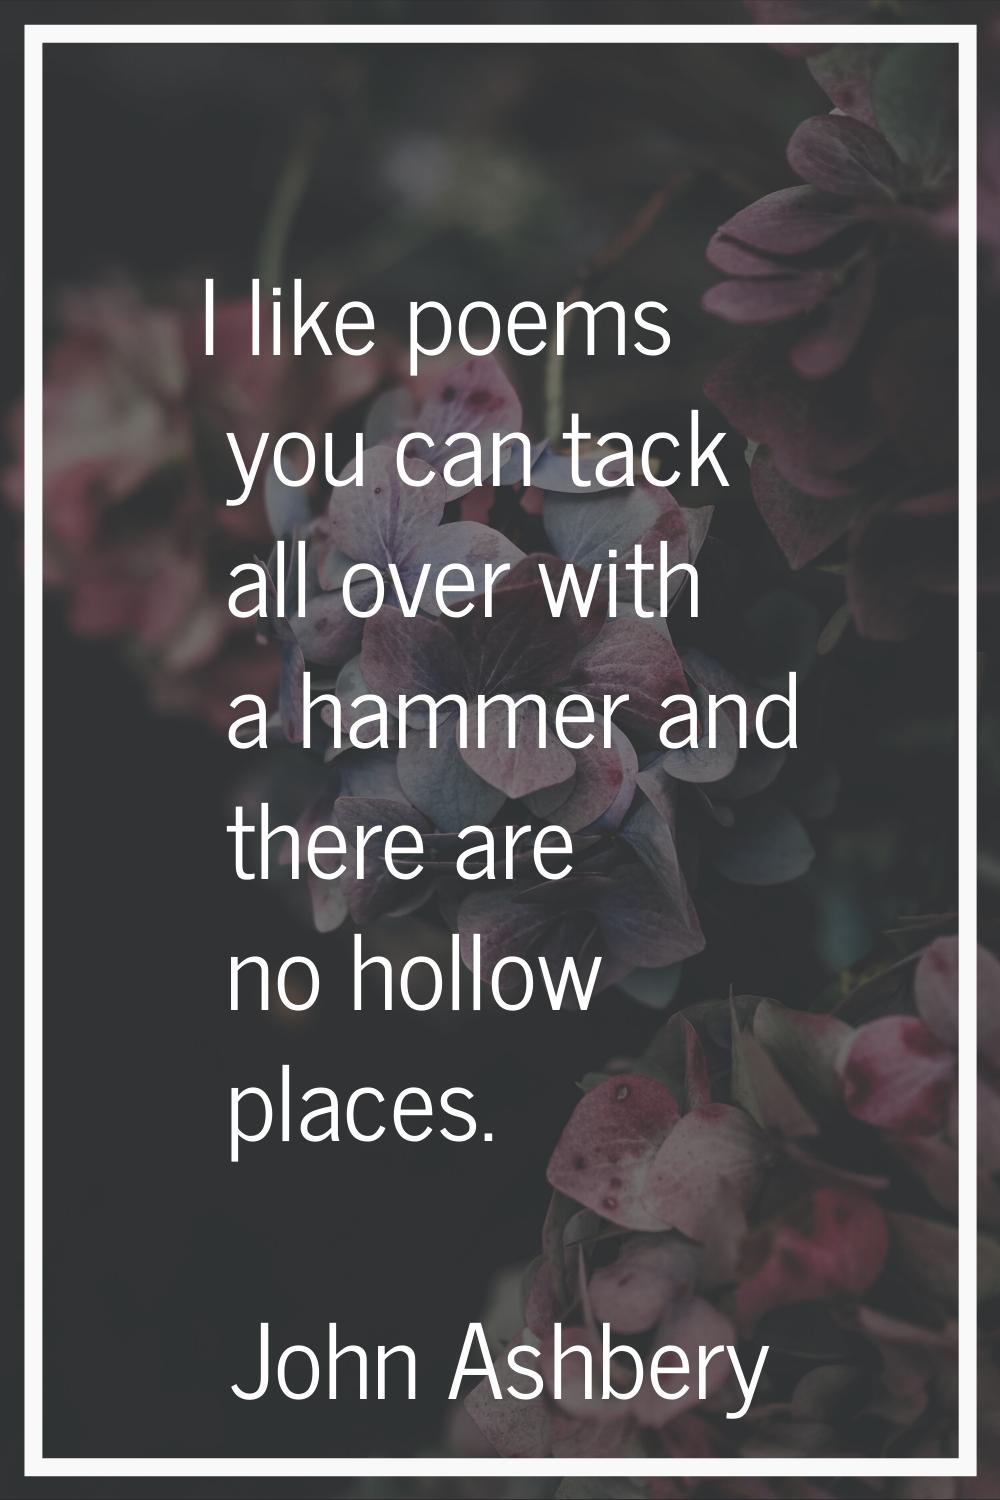 I like poems you can tack all over with a hammer and there are no hollow places.